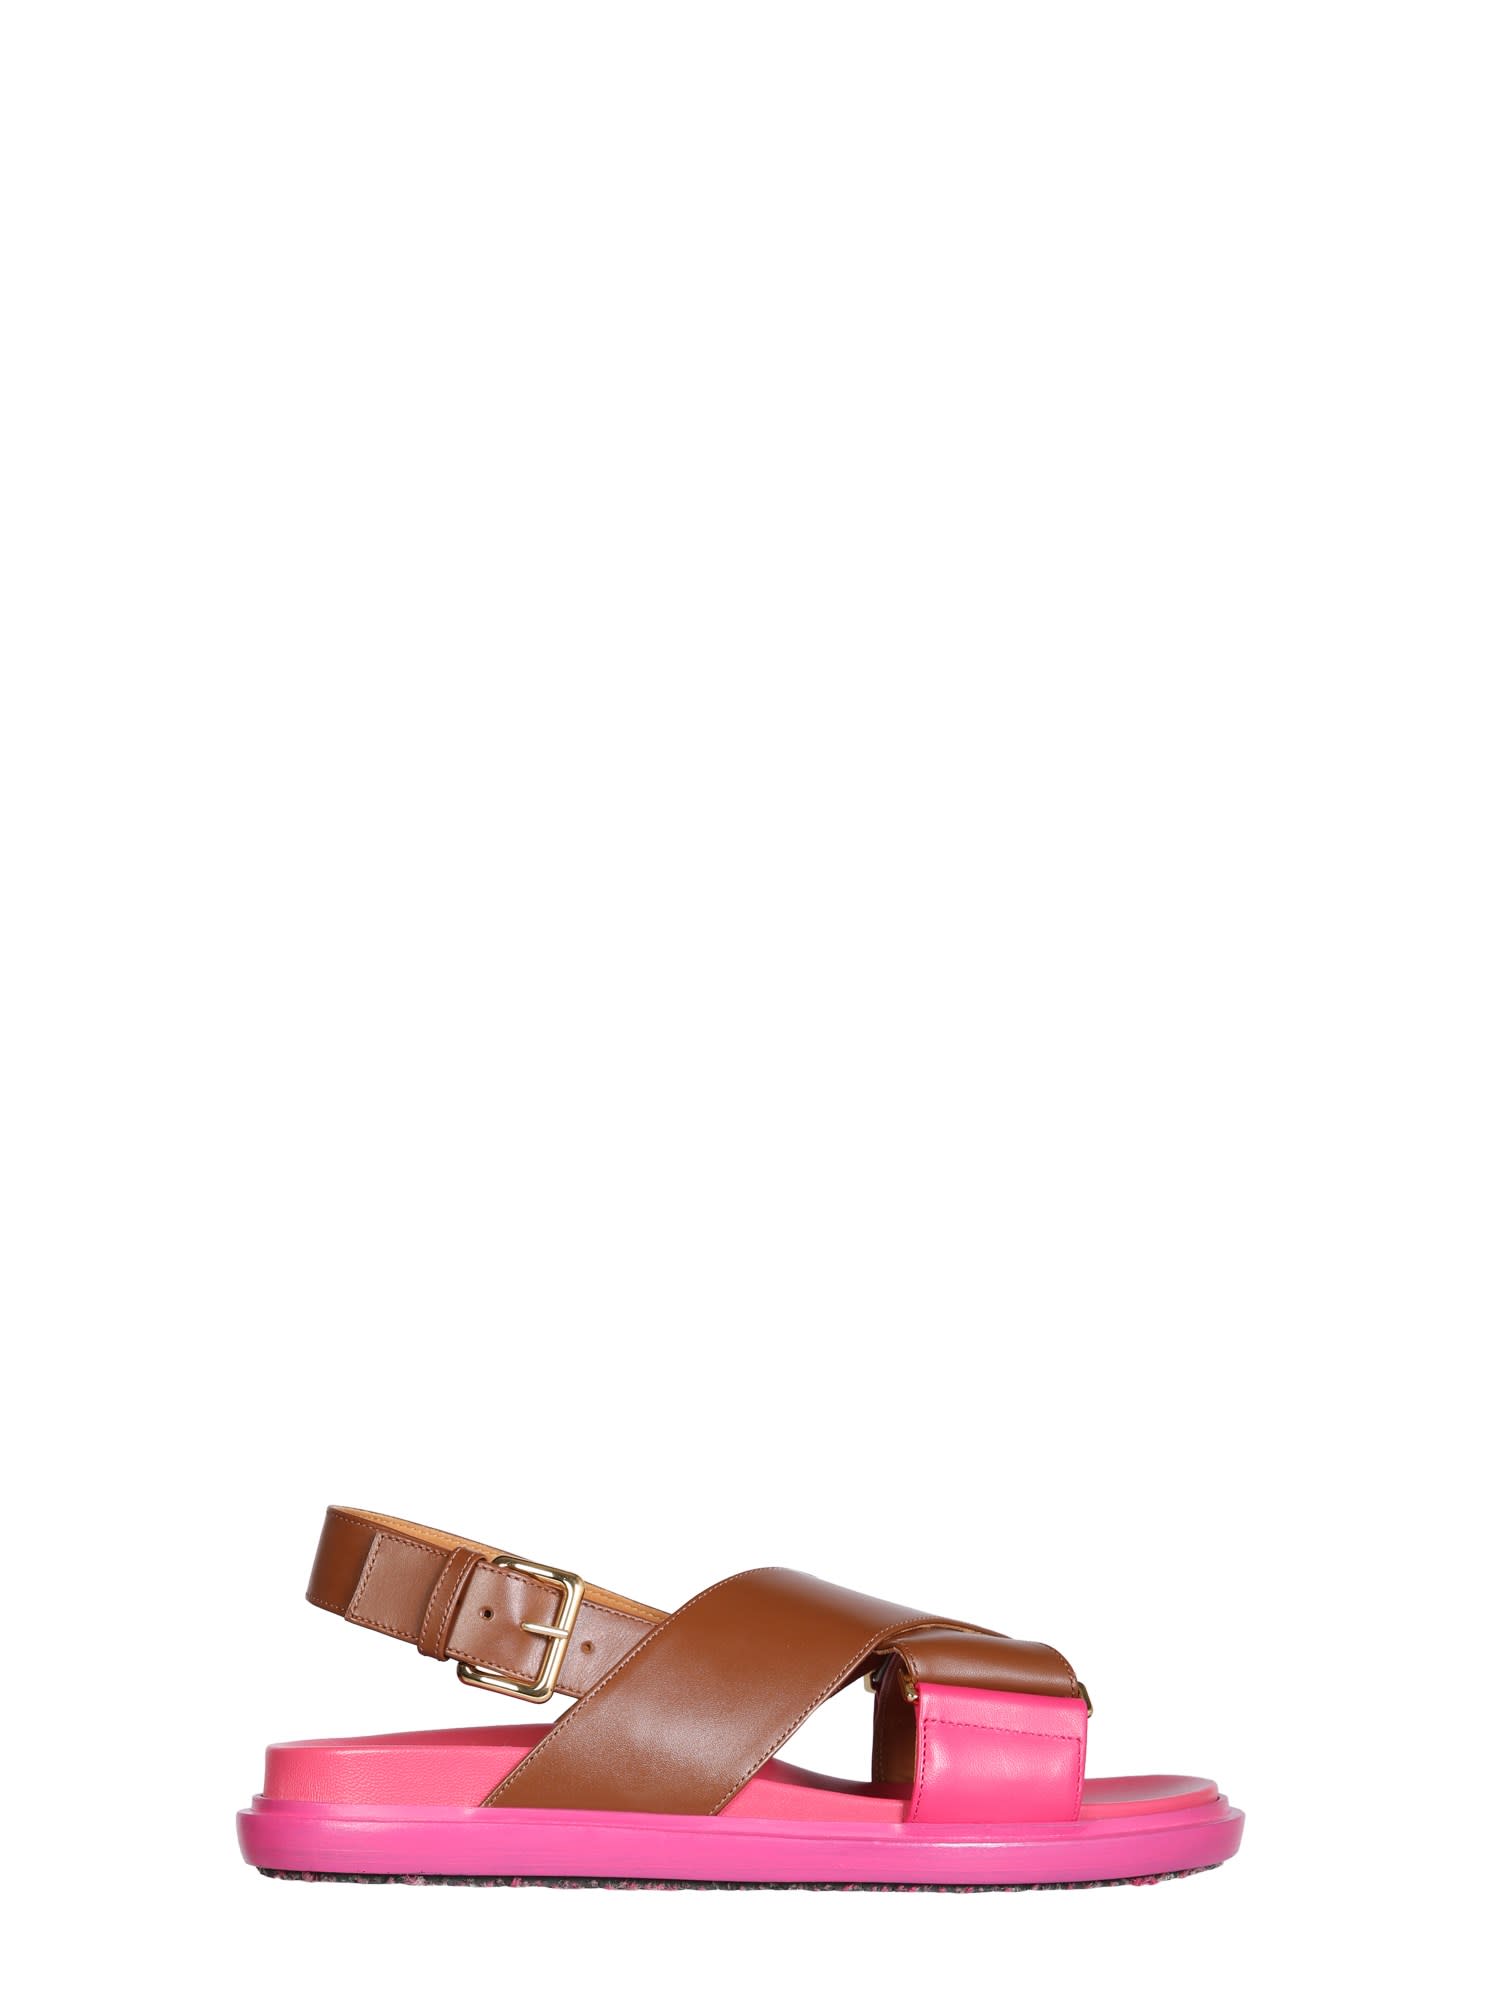 Buy Marni Footbed Sandals online, shop Marni shoes with free shipping